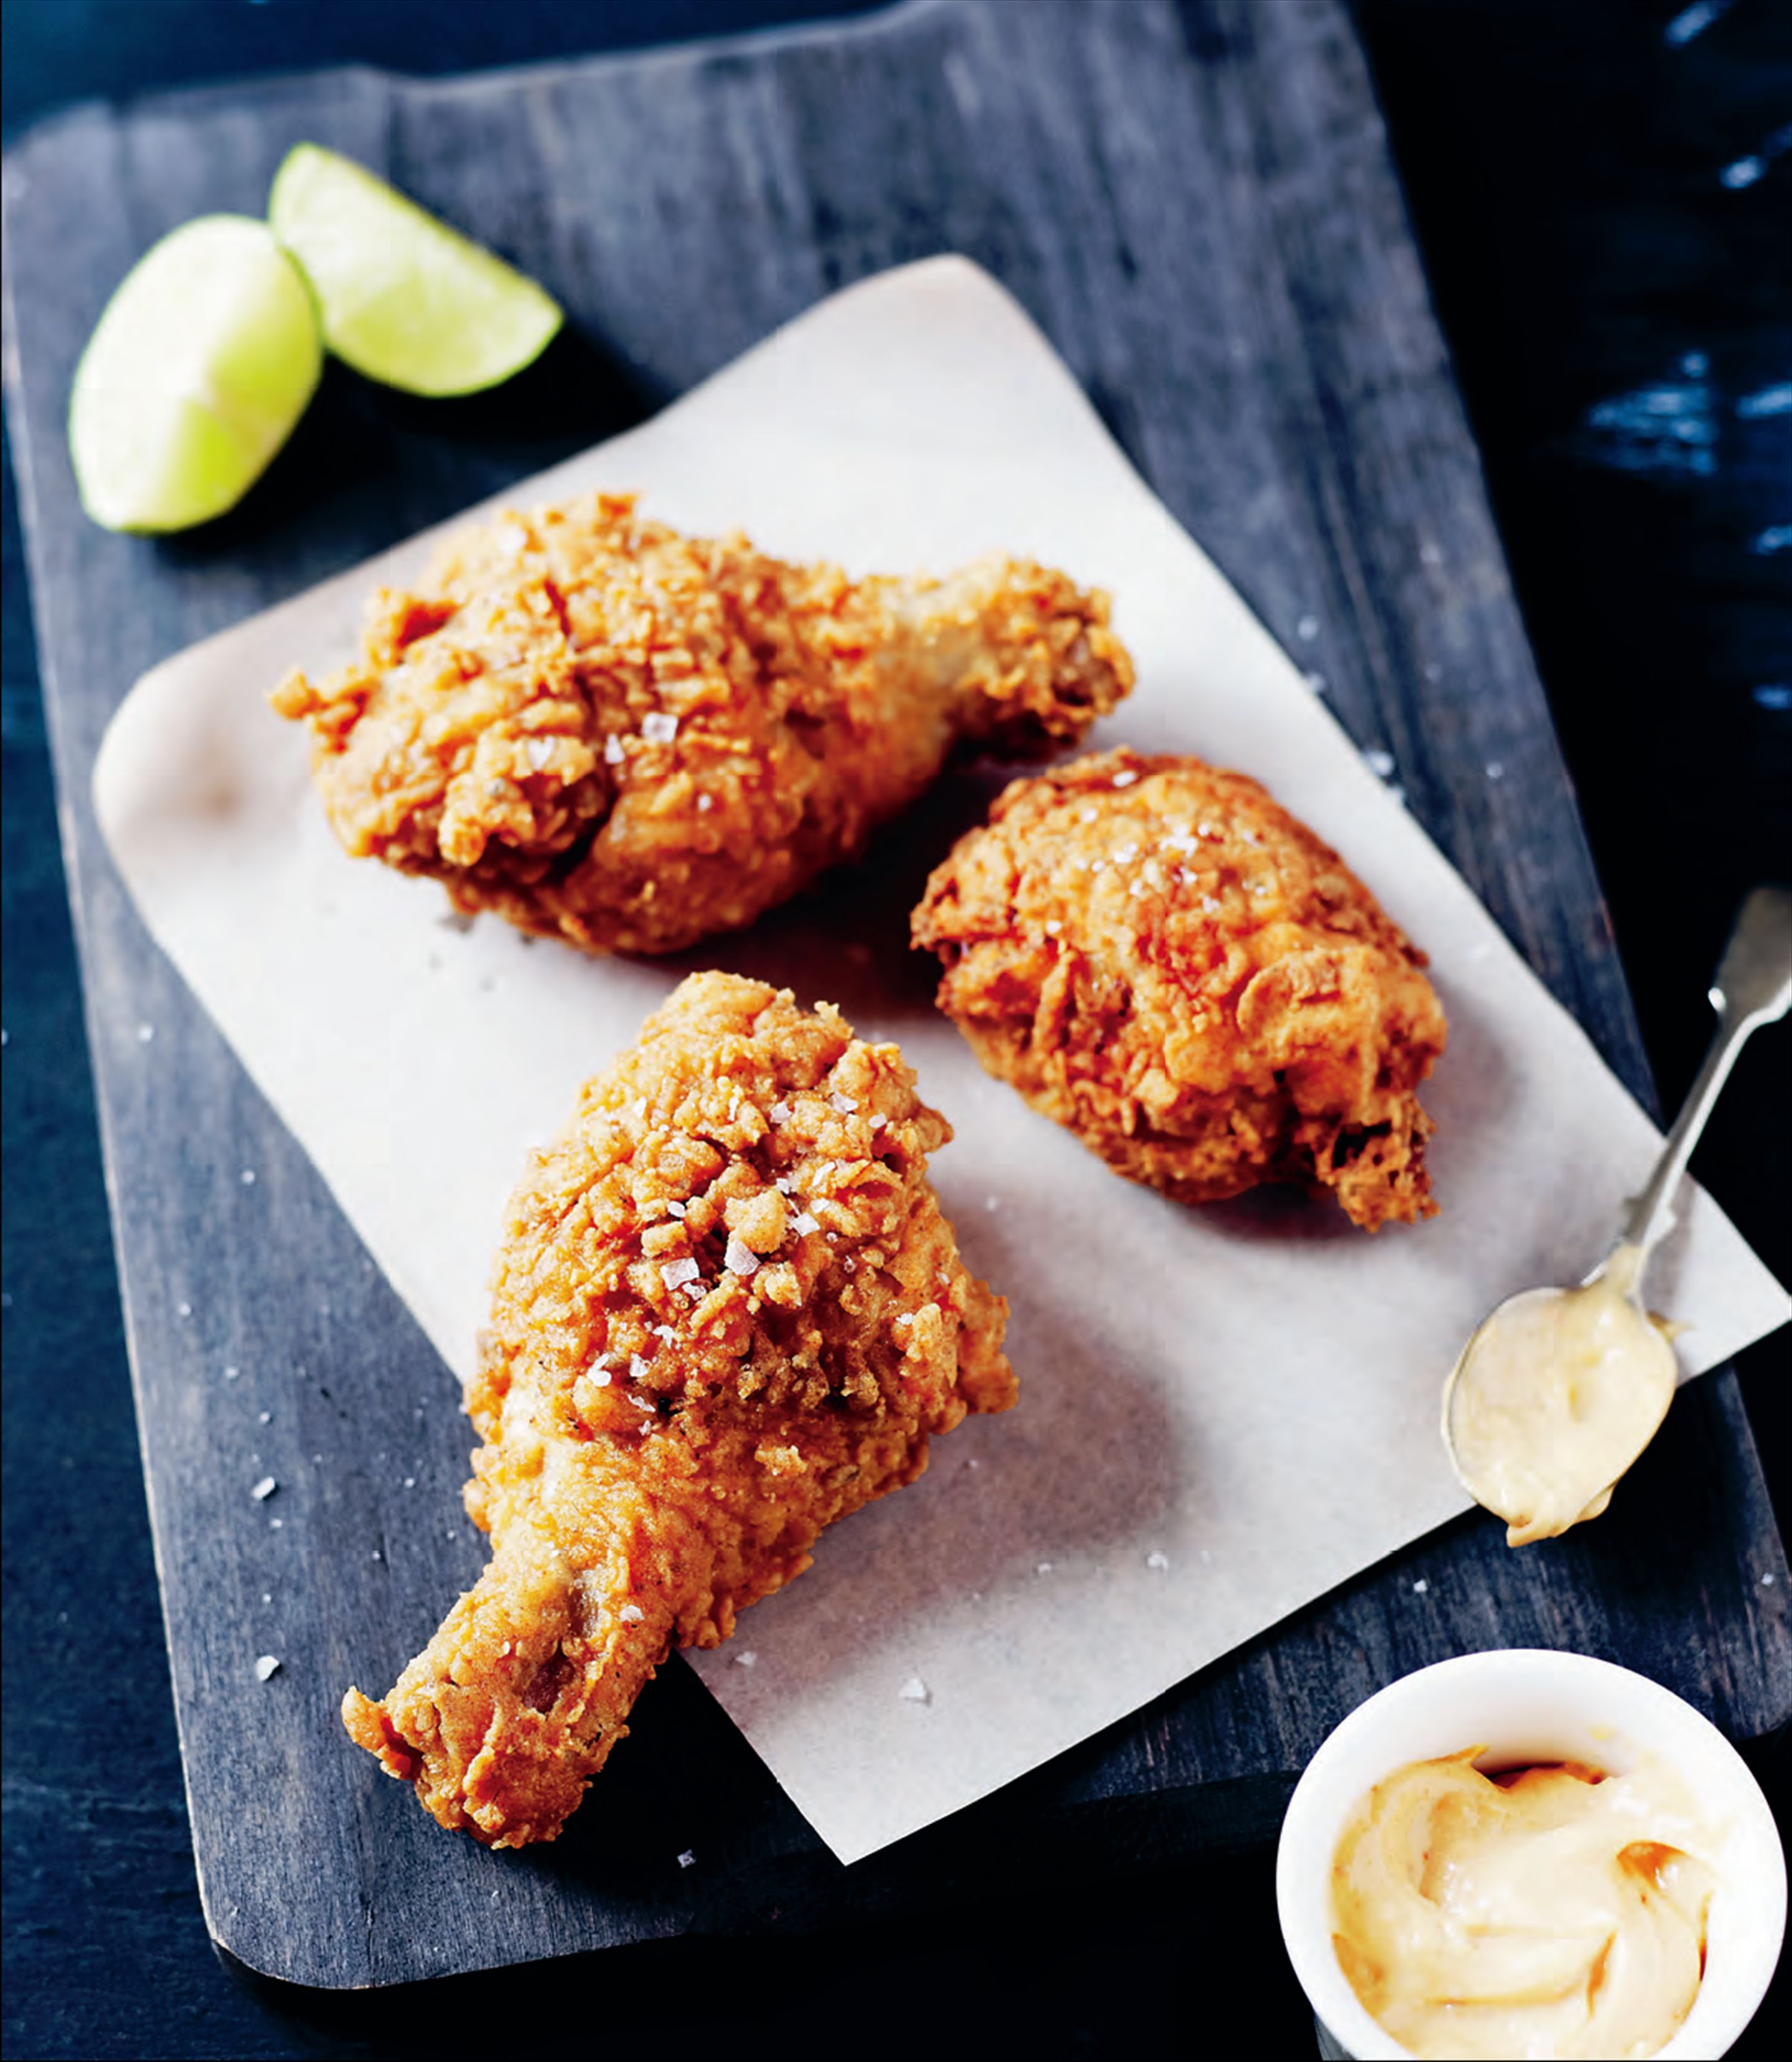 Buttermilk fried chicken with chipotle mayonnaise